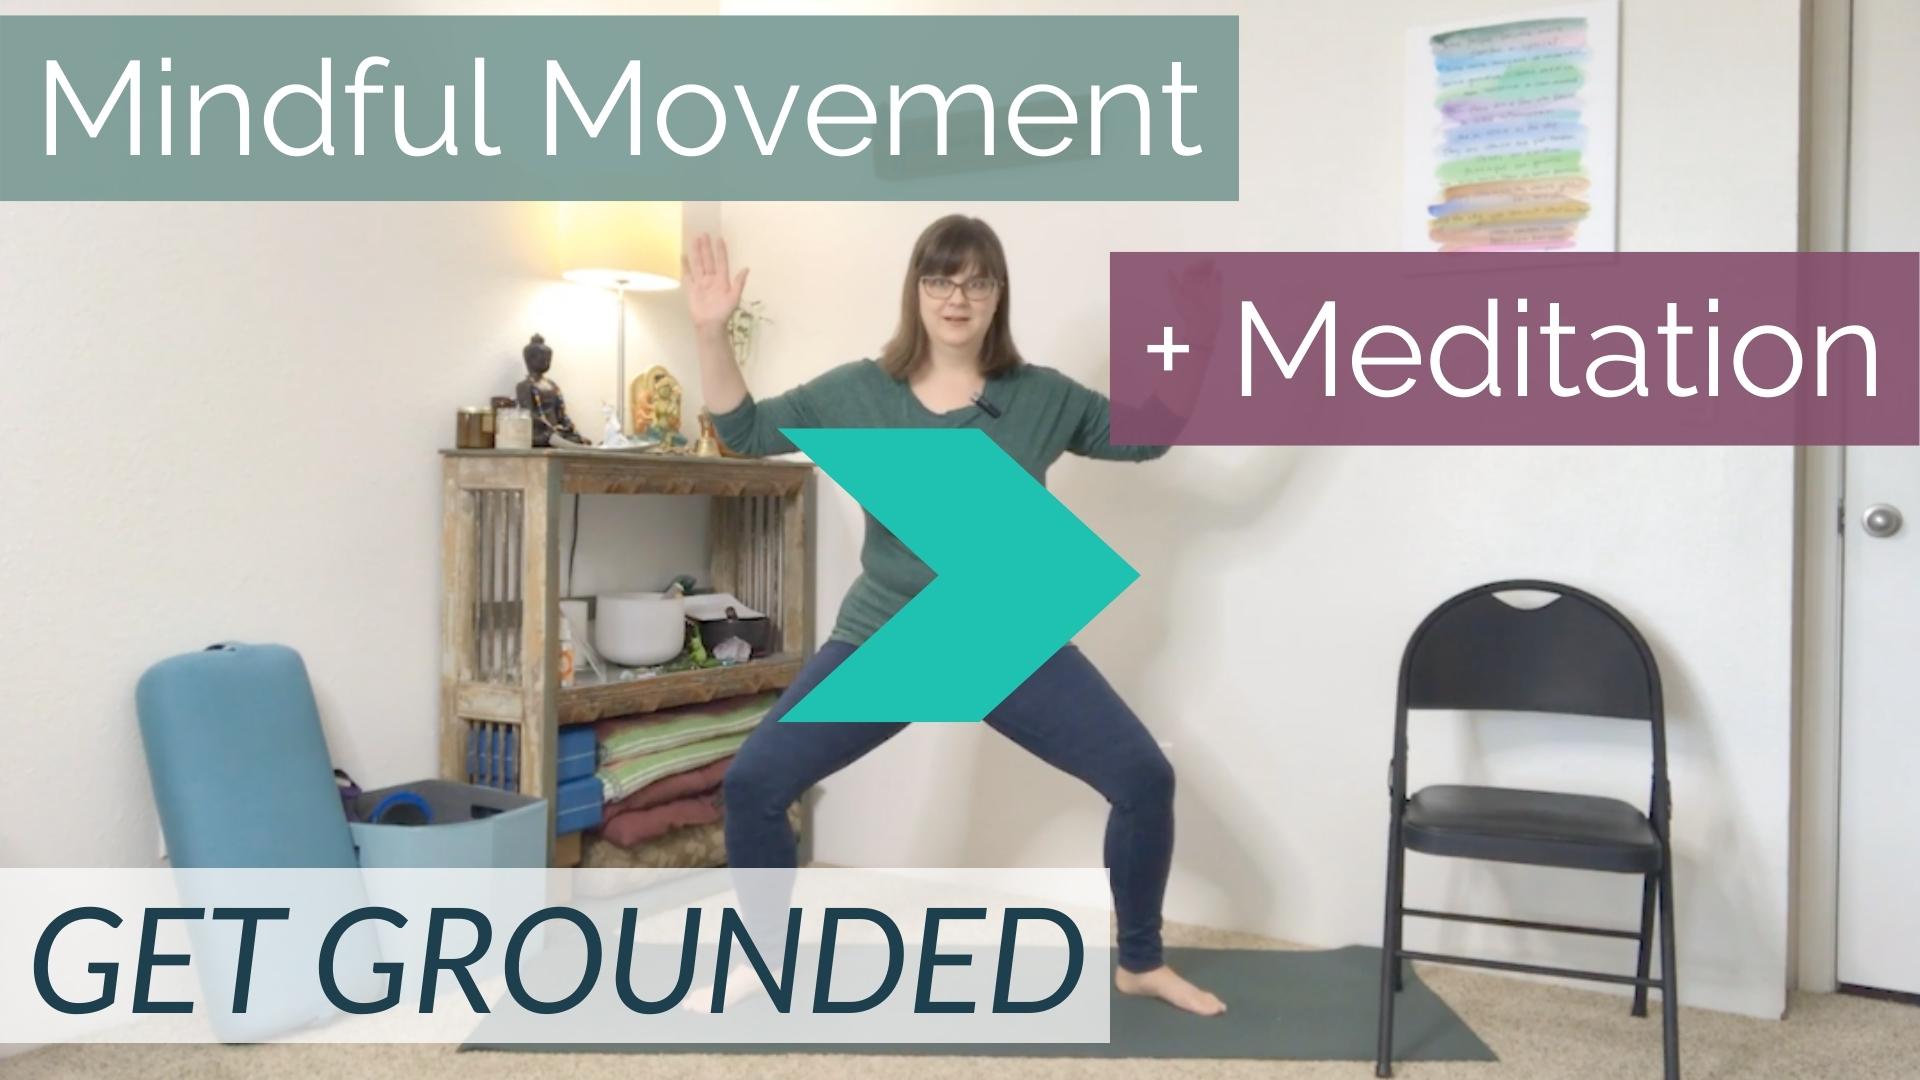 Try this free online mindful movement and meditation class to feel more grounded.